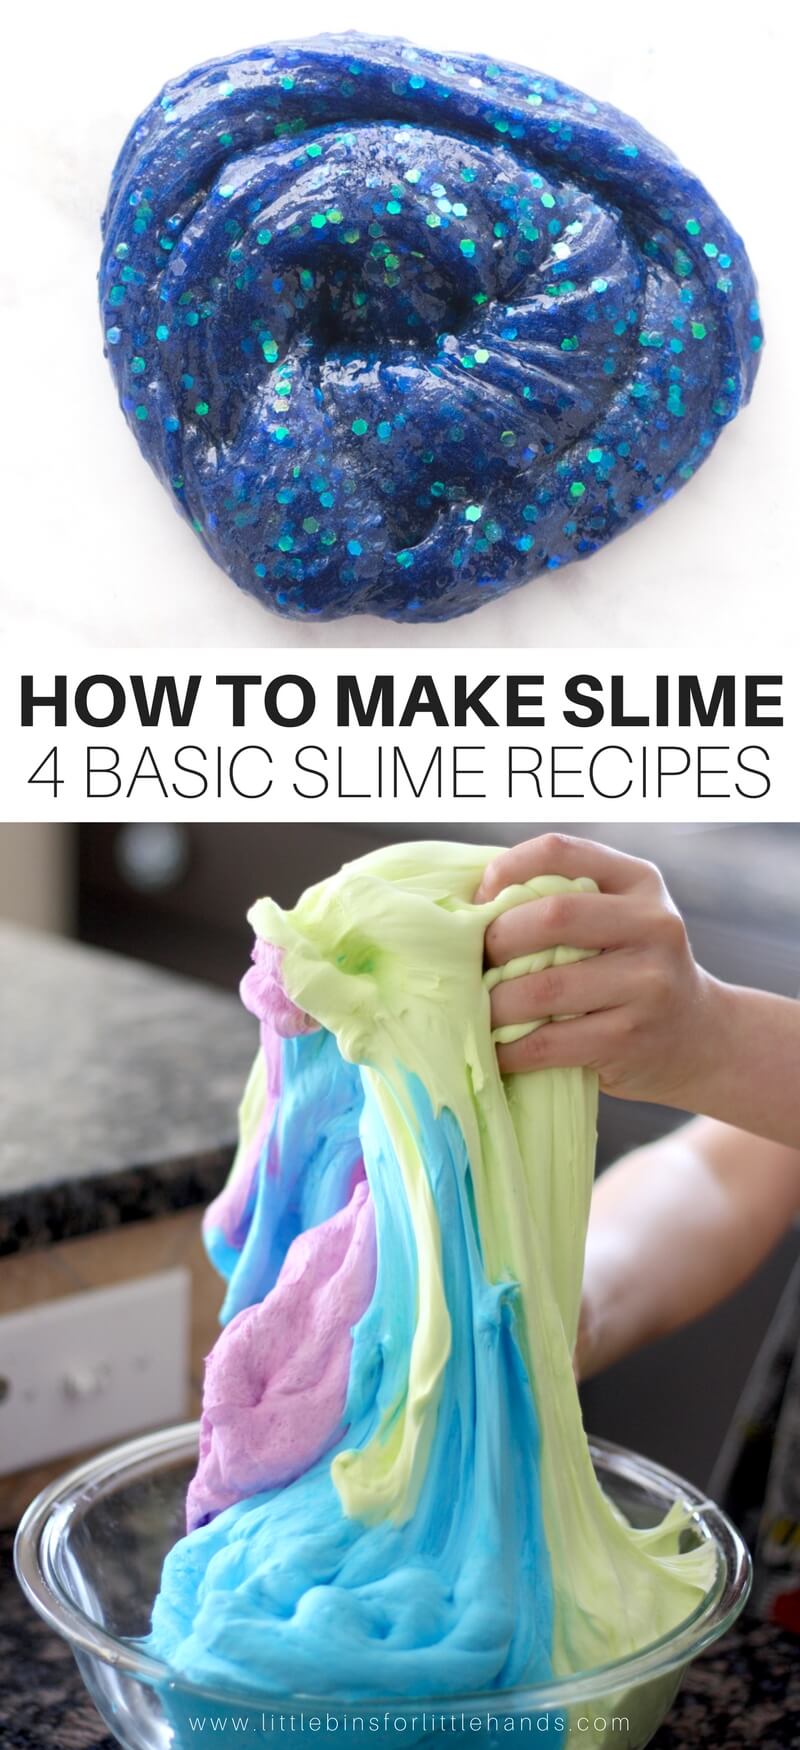 Yay! You have just landed on the best page to learn how to make slime, the most awesome slime ever in fact! Classroom or home, camp or vacation, these homemade slime recipes are exactly what you need for the perfect afternoon of slimey fun. I have four basic slime recipes that are the backbone of all our slime creations and can be dressed up in so many ways! Make sure to read up on making slime this year.